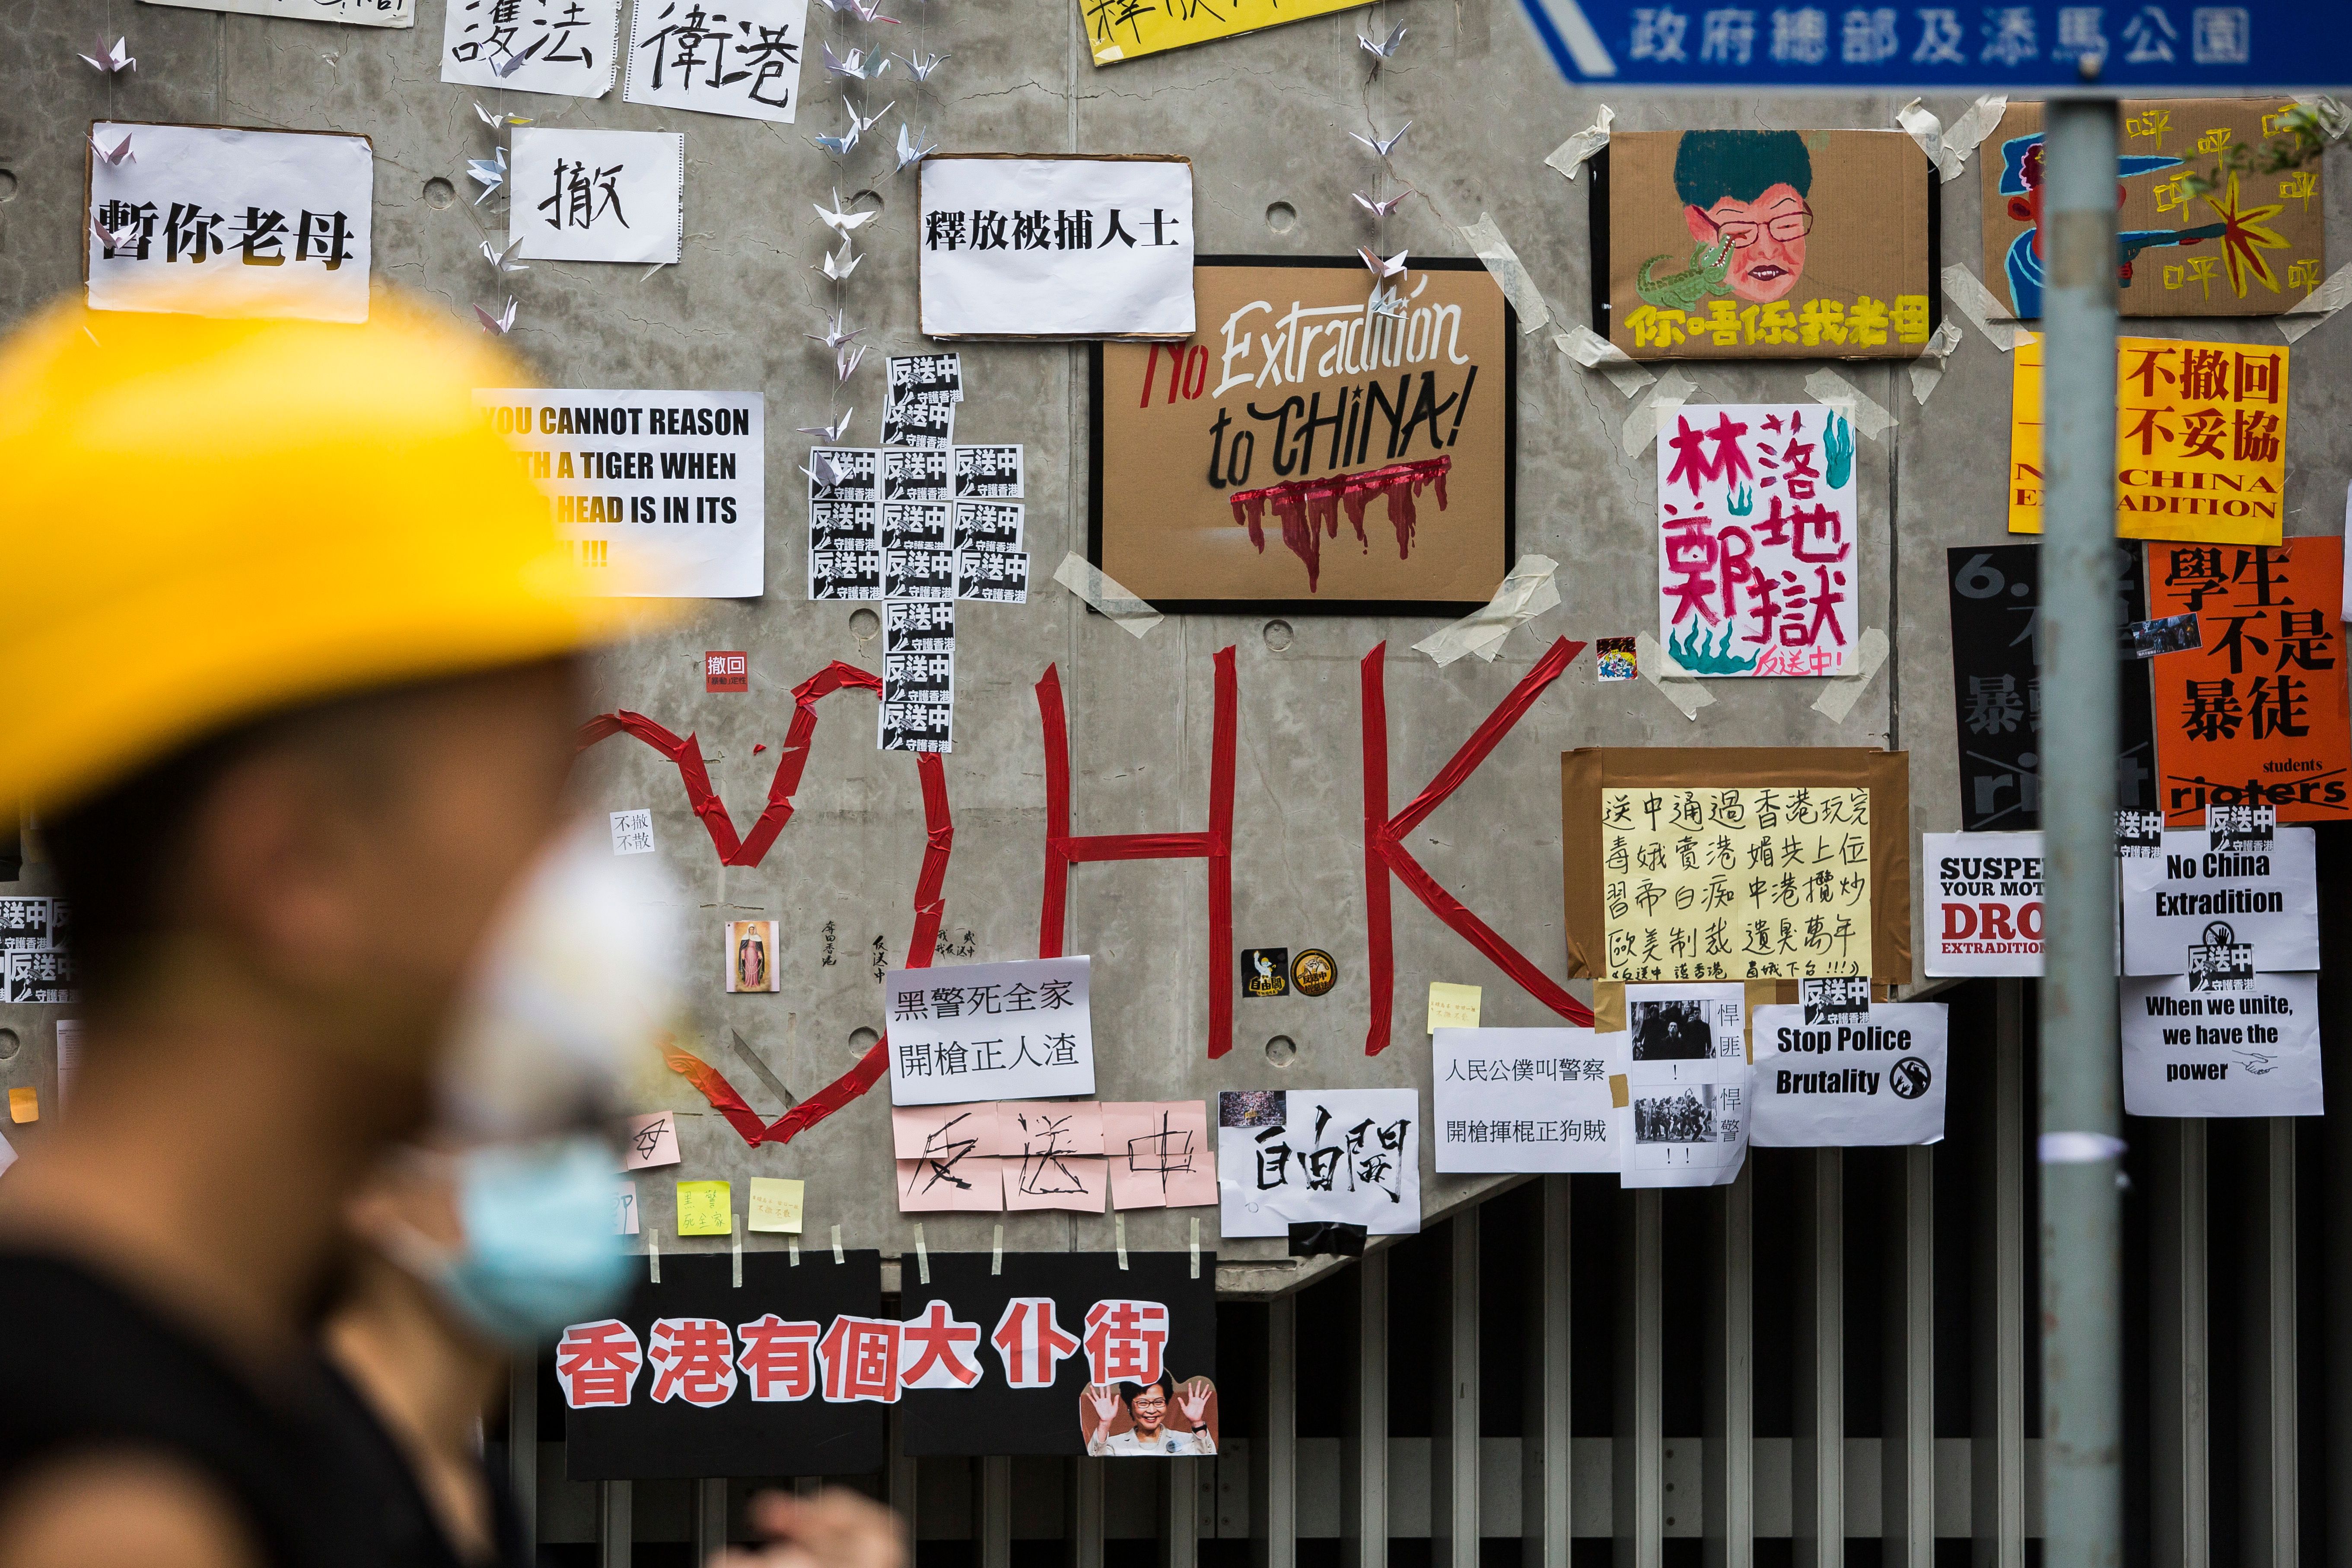 eople walk past a wall covered in messages and posters in Hong Kong early on June 17, 2019. 